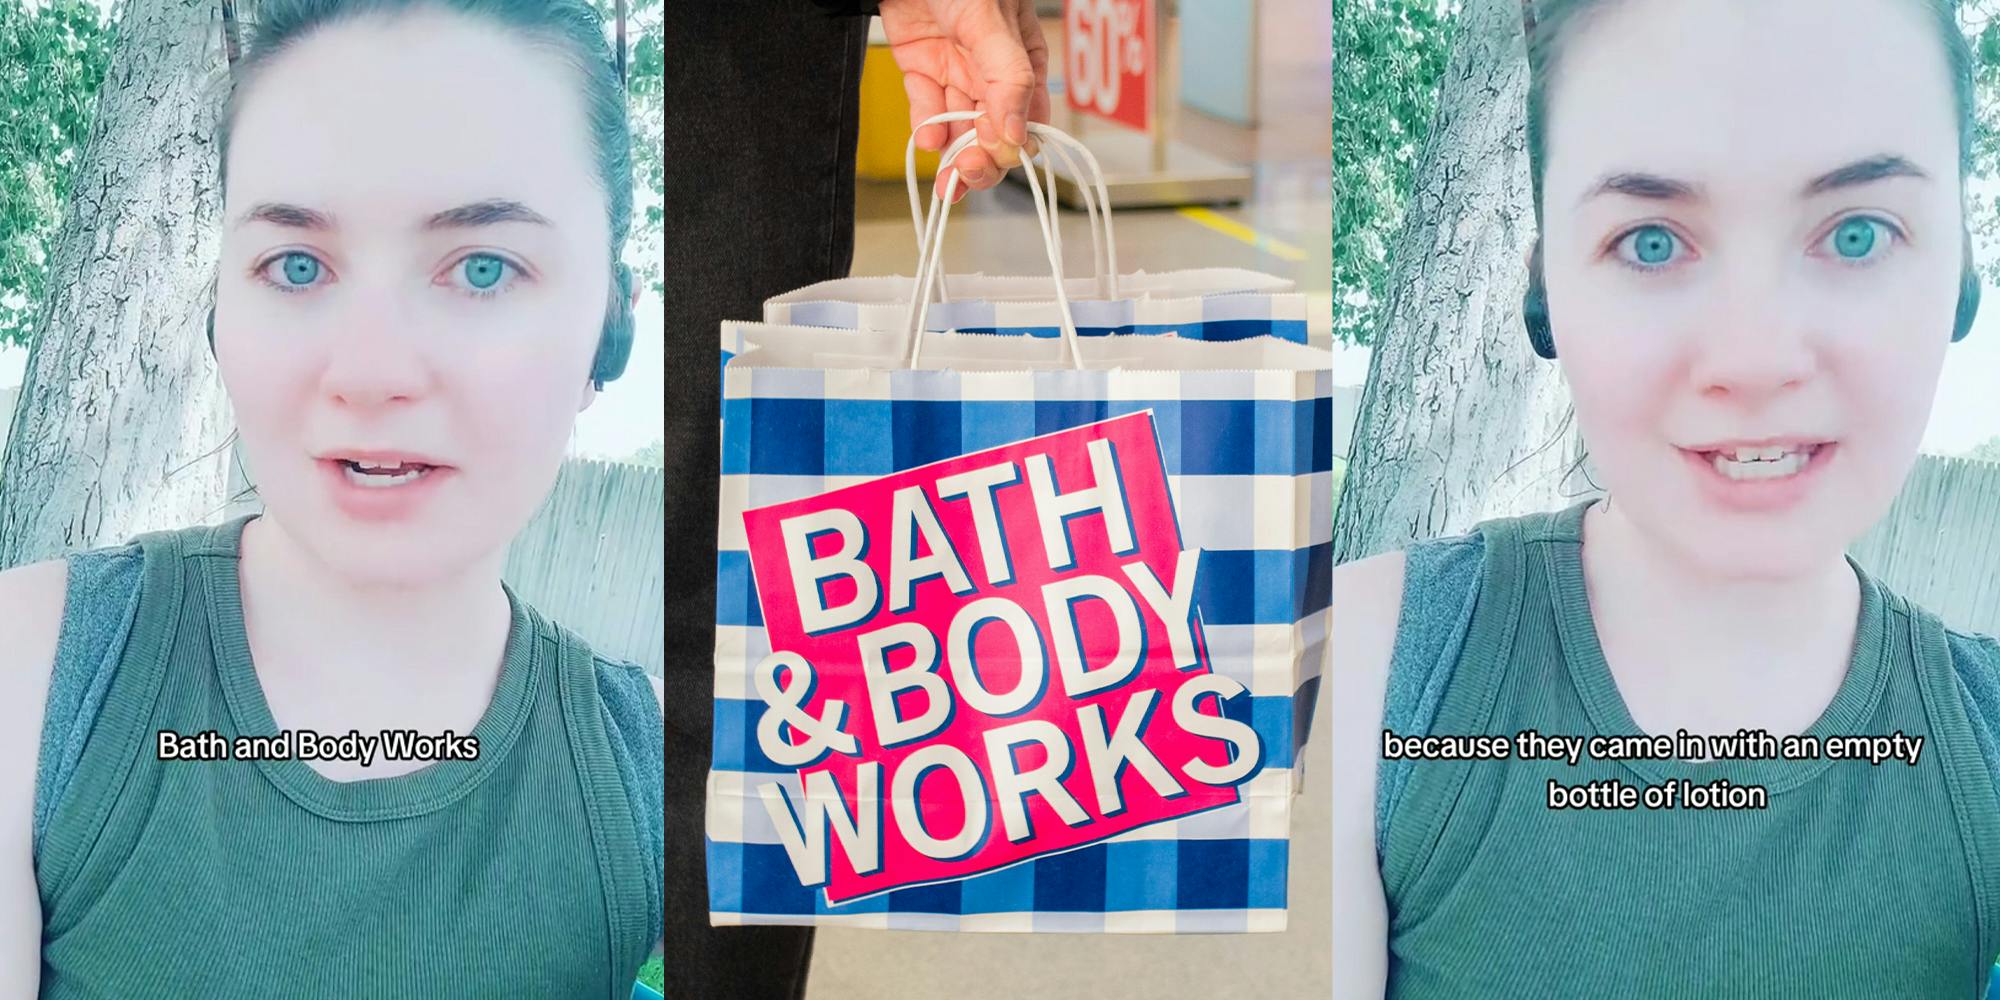 ExBath & Body Works Worker Exposes Store's Return Policy